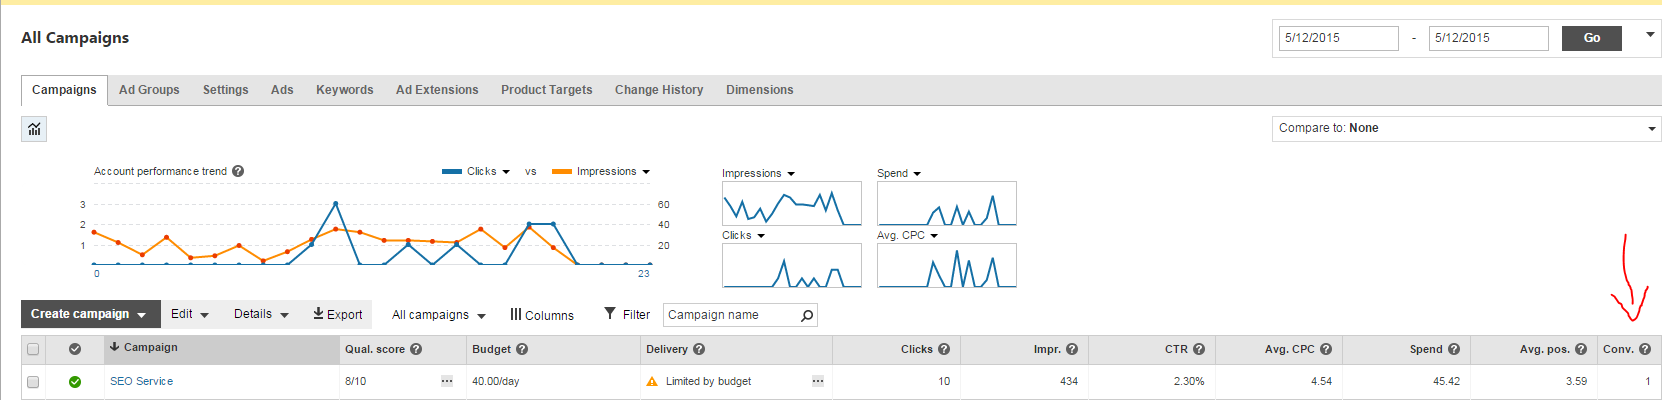 Bing Ads Conversion in the Dashboard